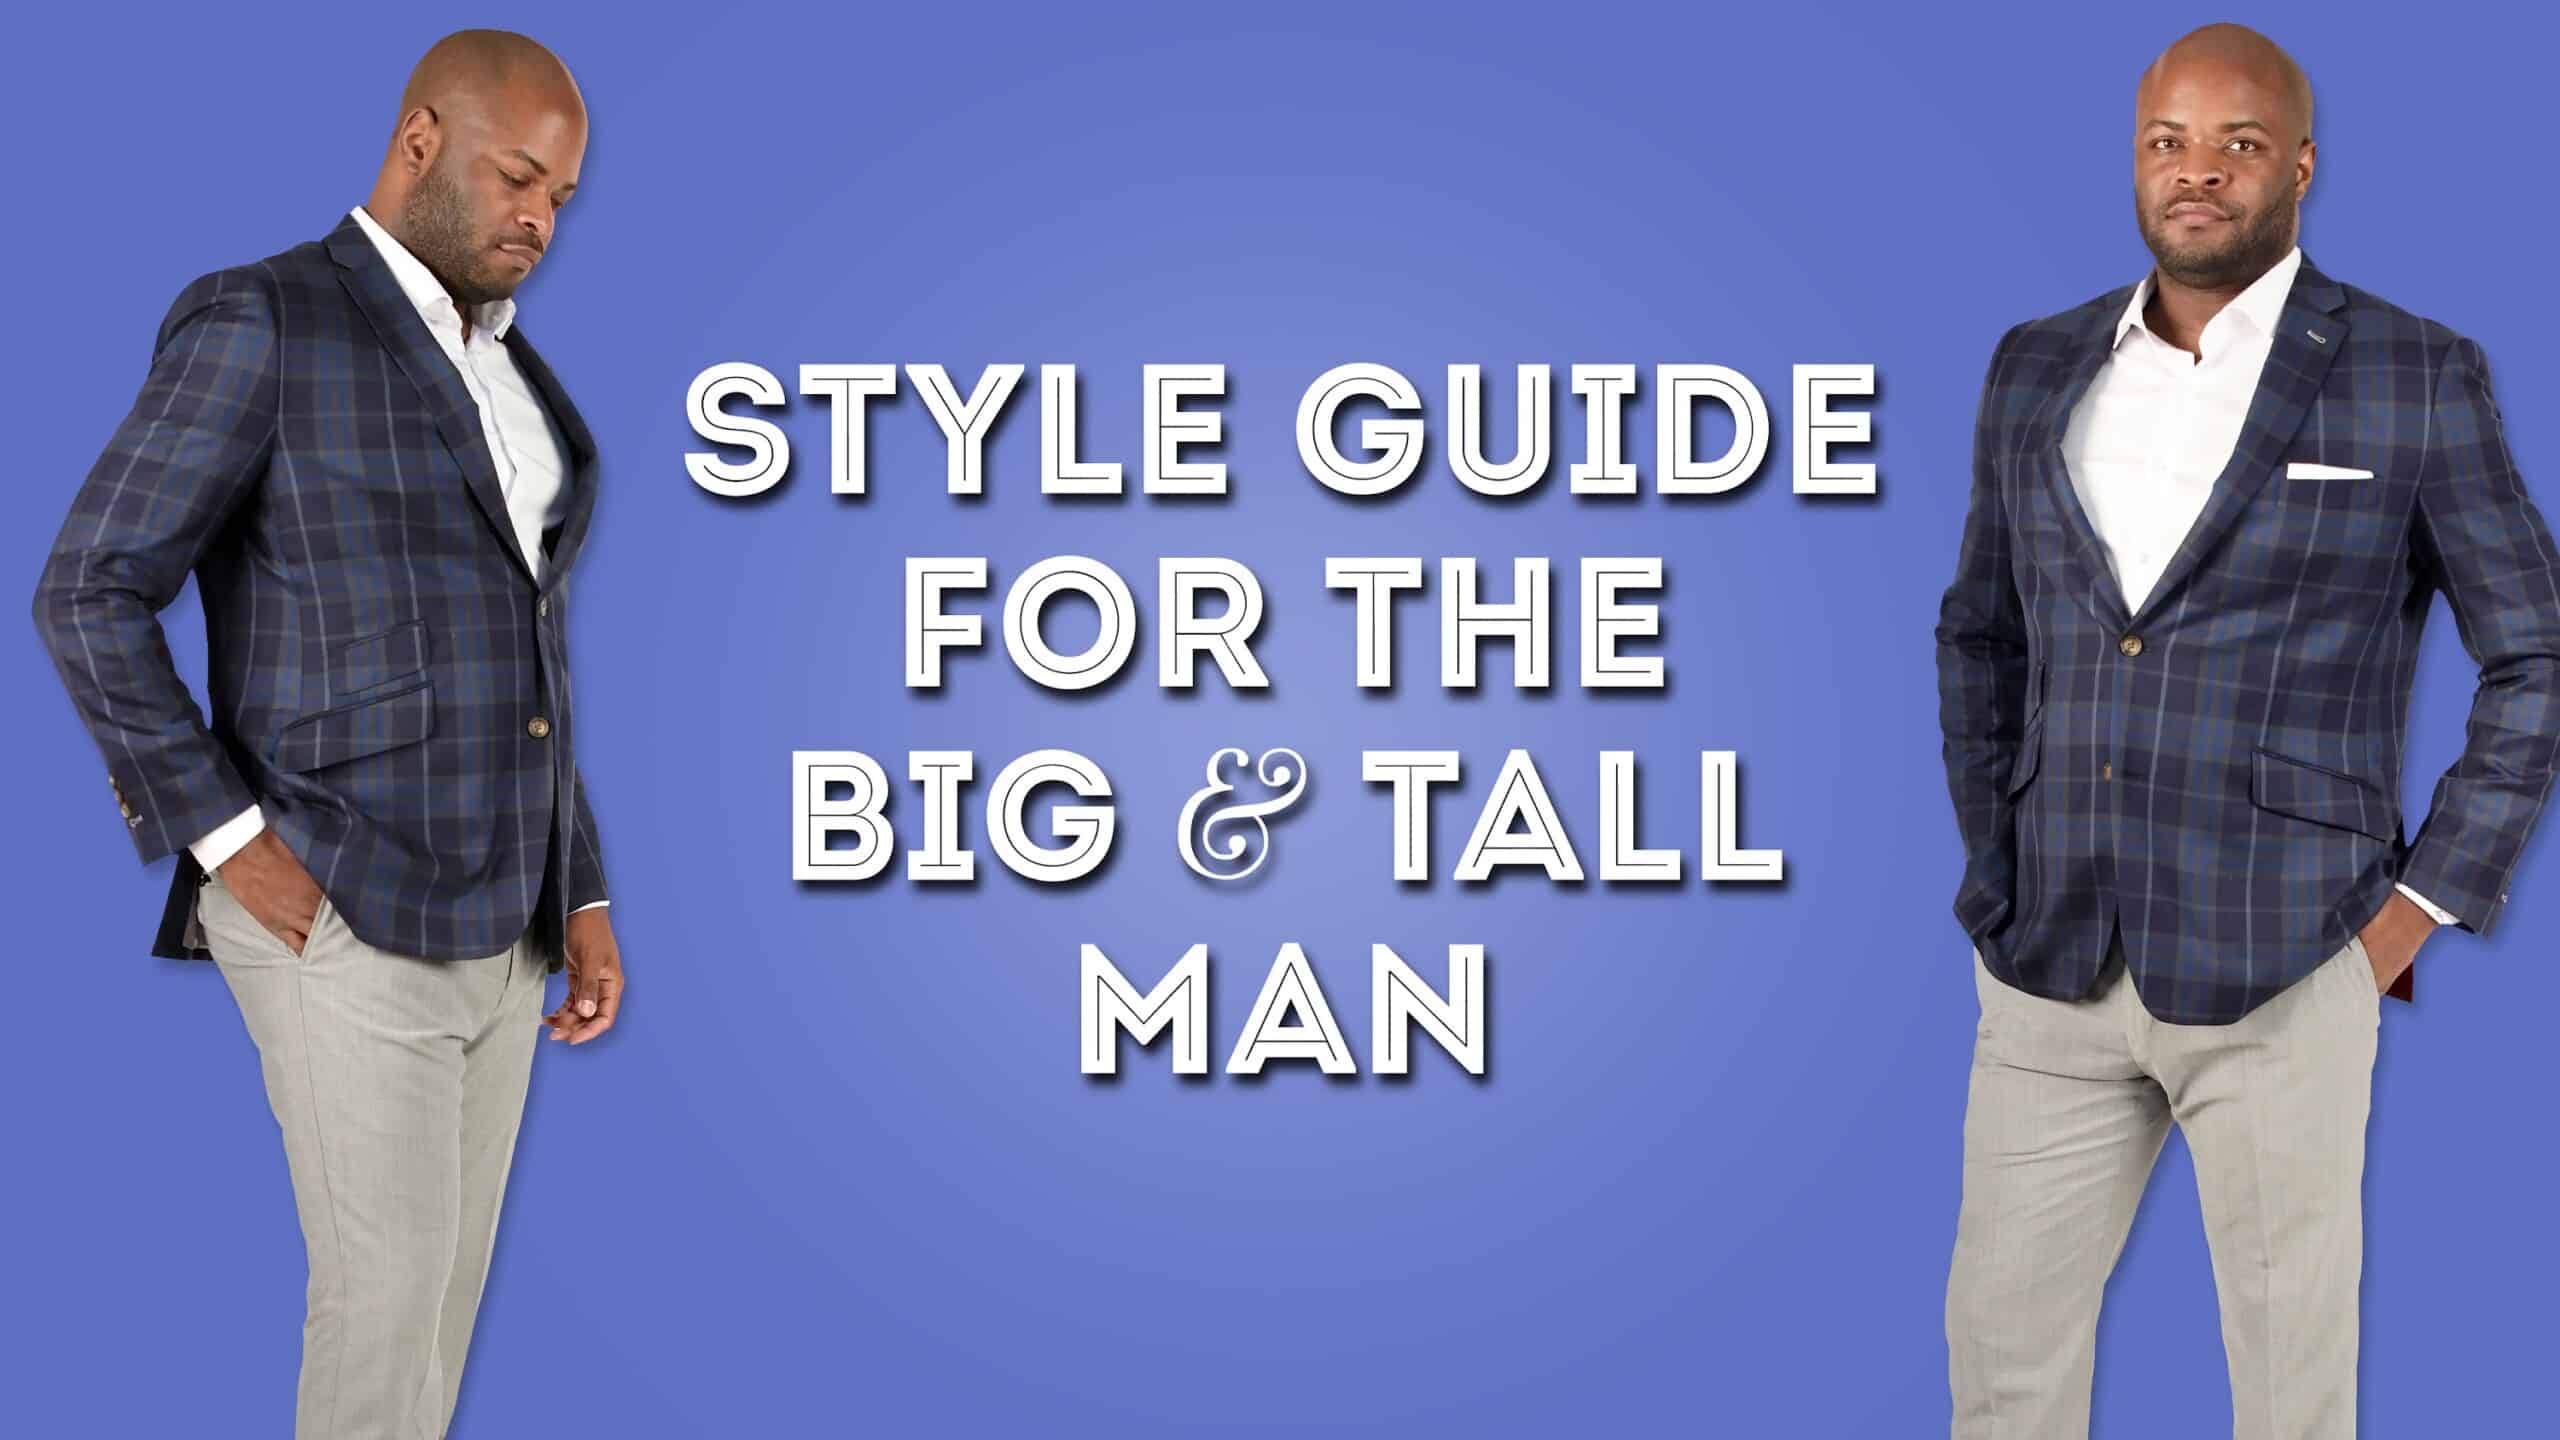 Style Guide For The Big ☀ Tall Man ...